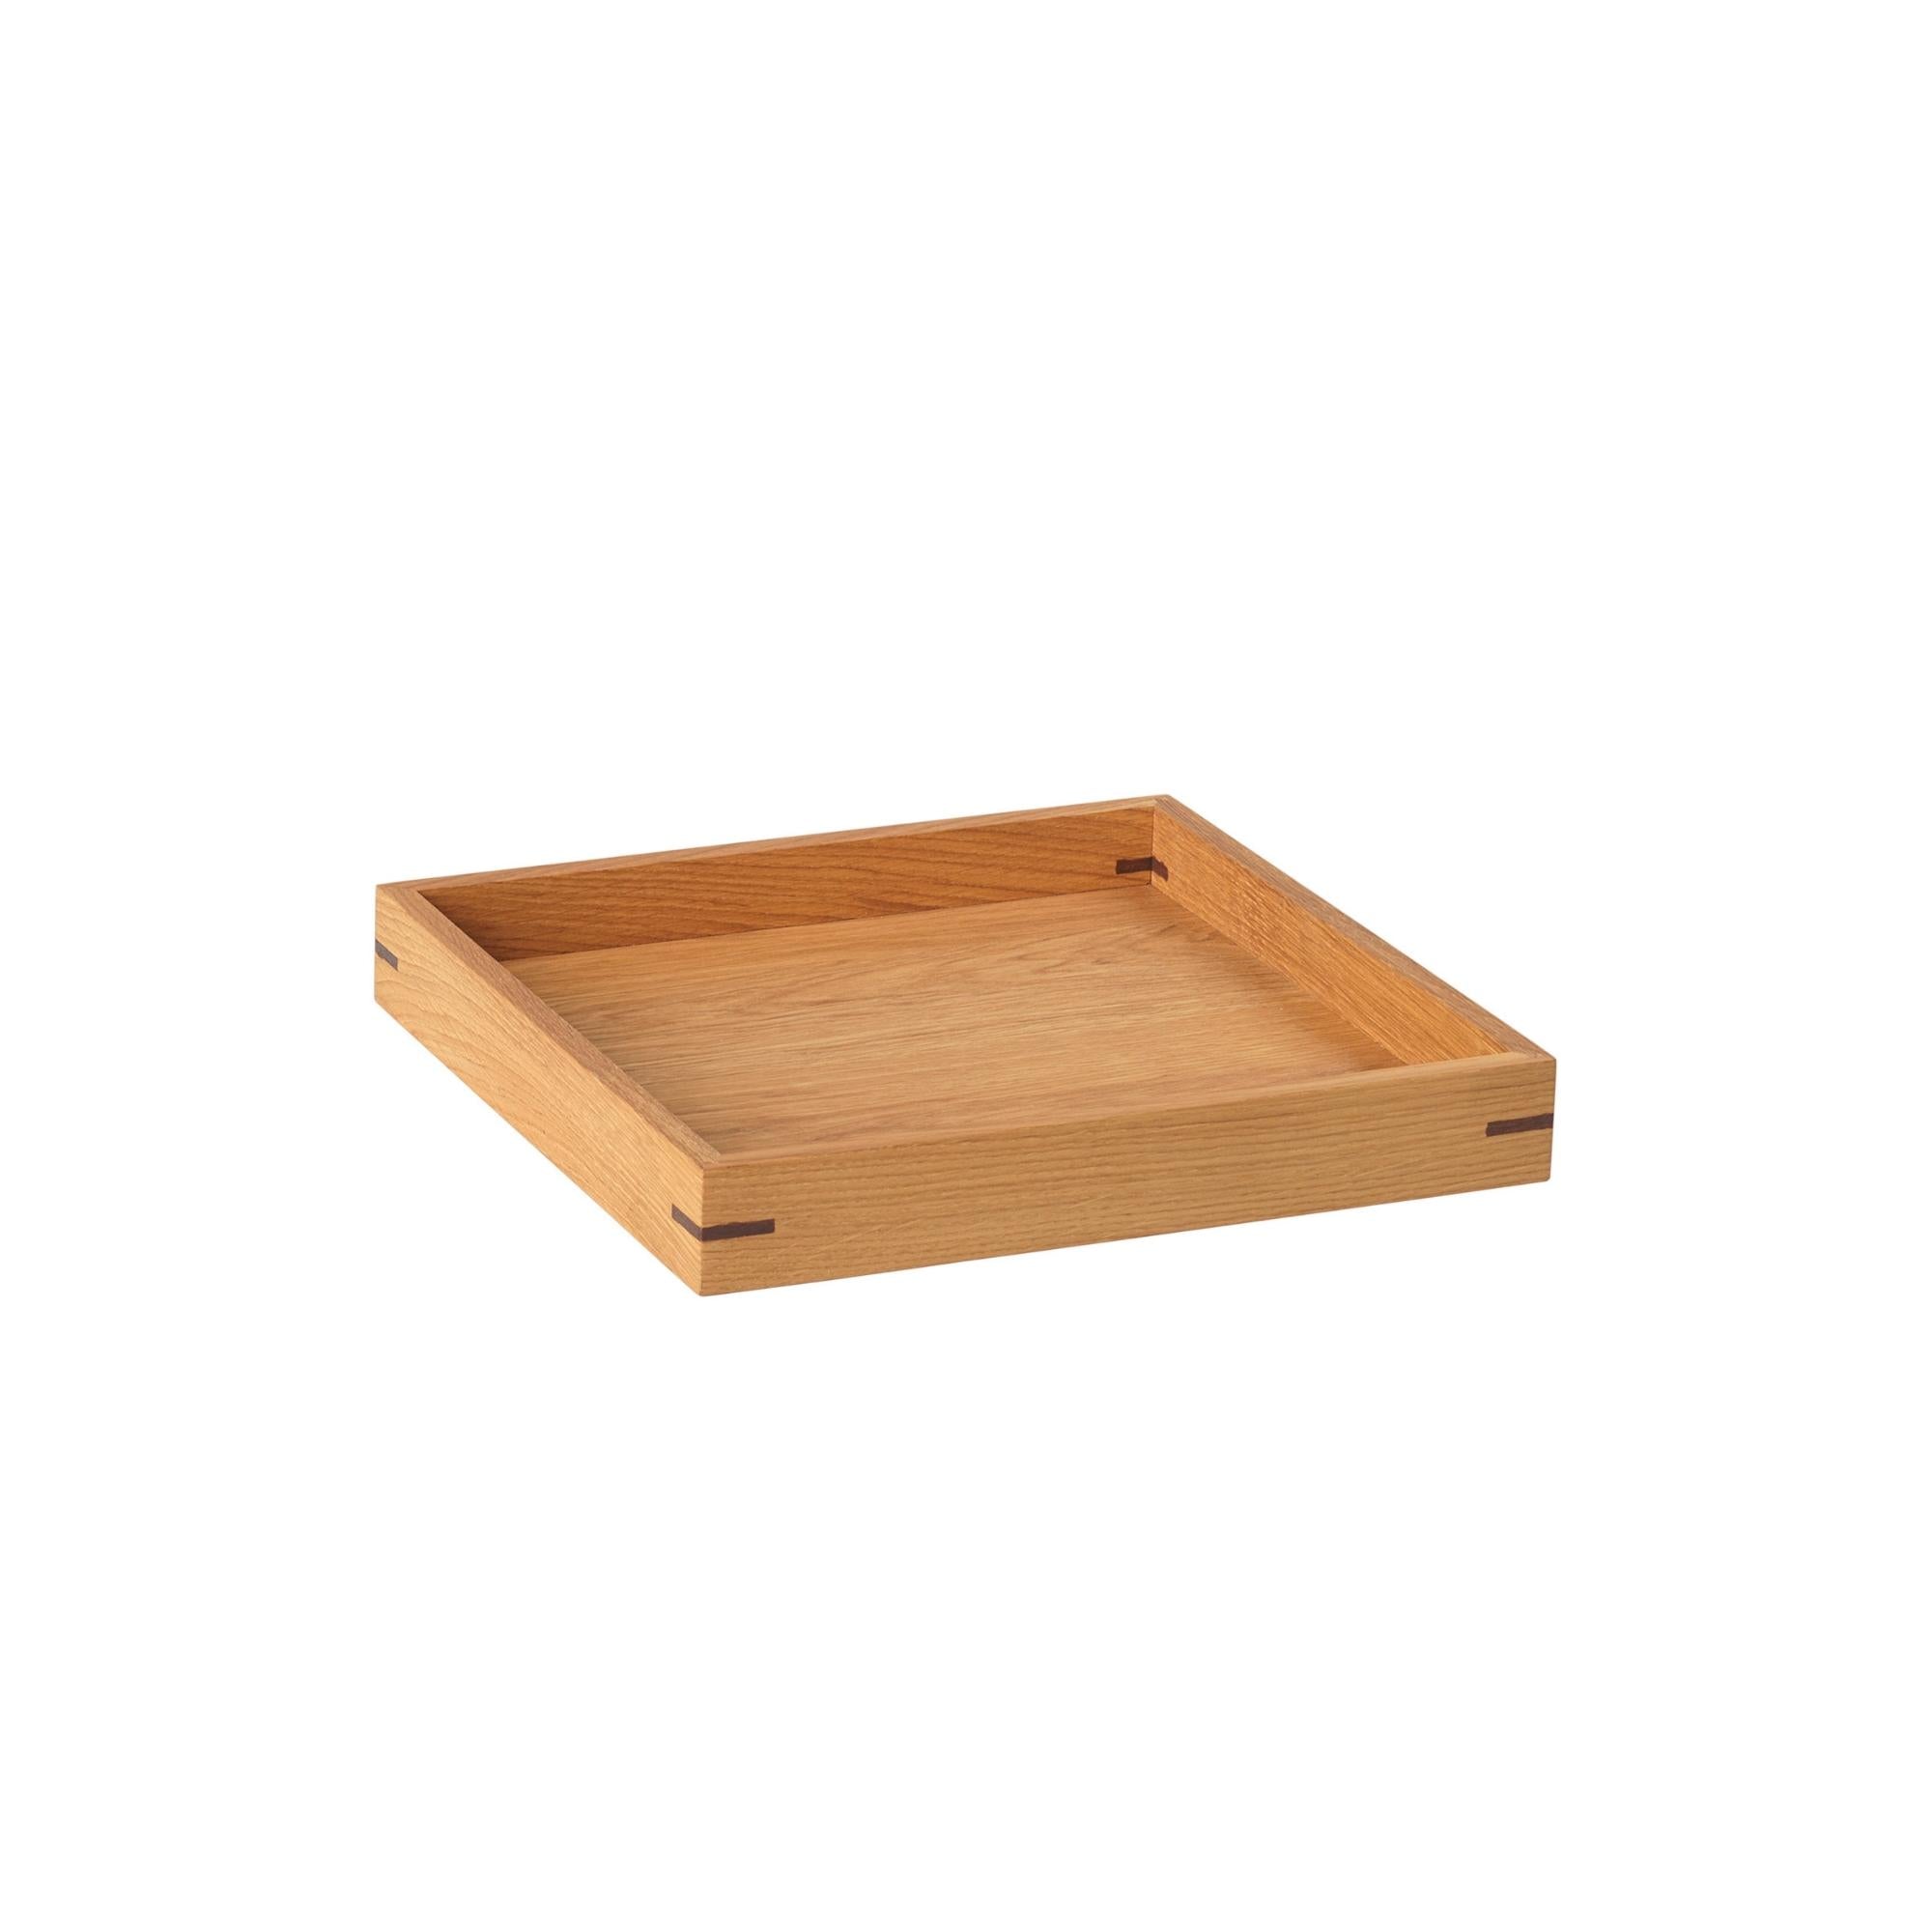 Japanese Tray - S - THAT COOL LIVING